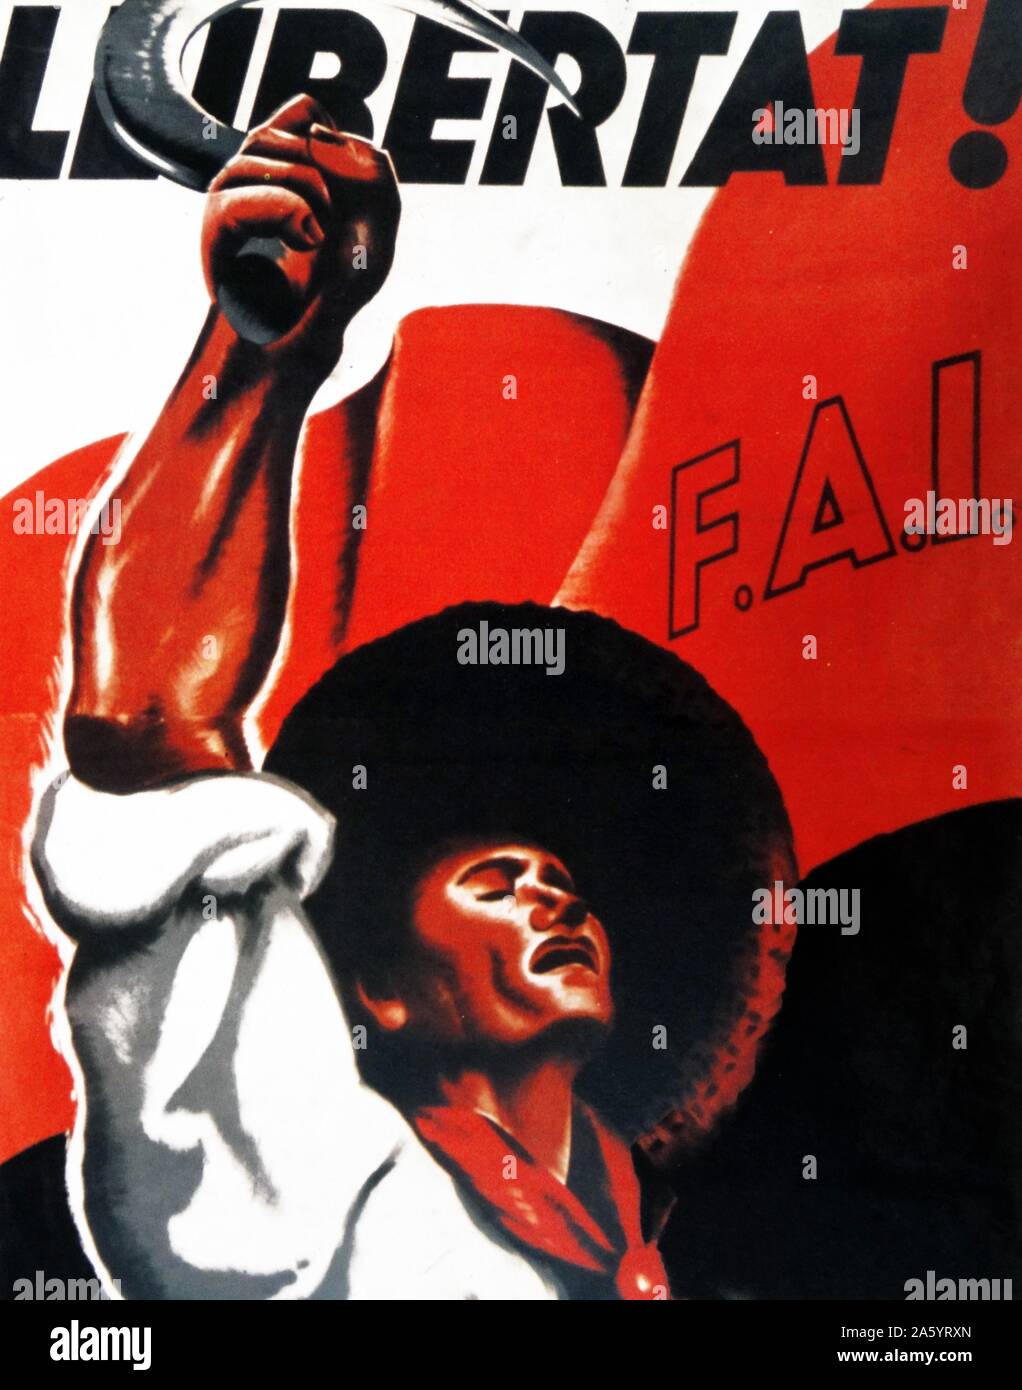 Libertat! Propaganda poster published by the Federación Anarquista Ibérica (FAI), Members of the Anarchist Federation, were at the forefront of the fight against Francisco Franco's forces during the Spanish Civil War, Stock Photo